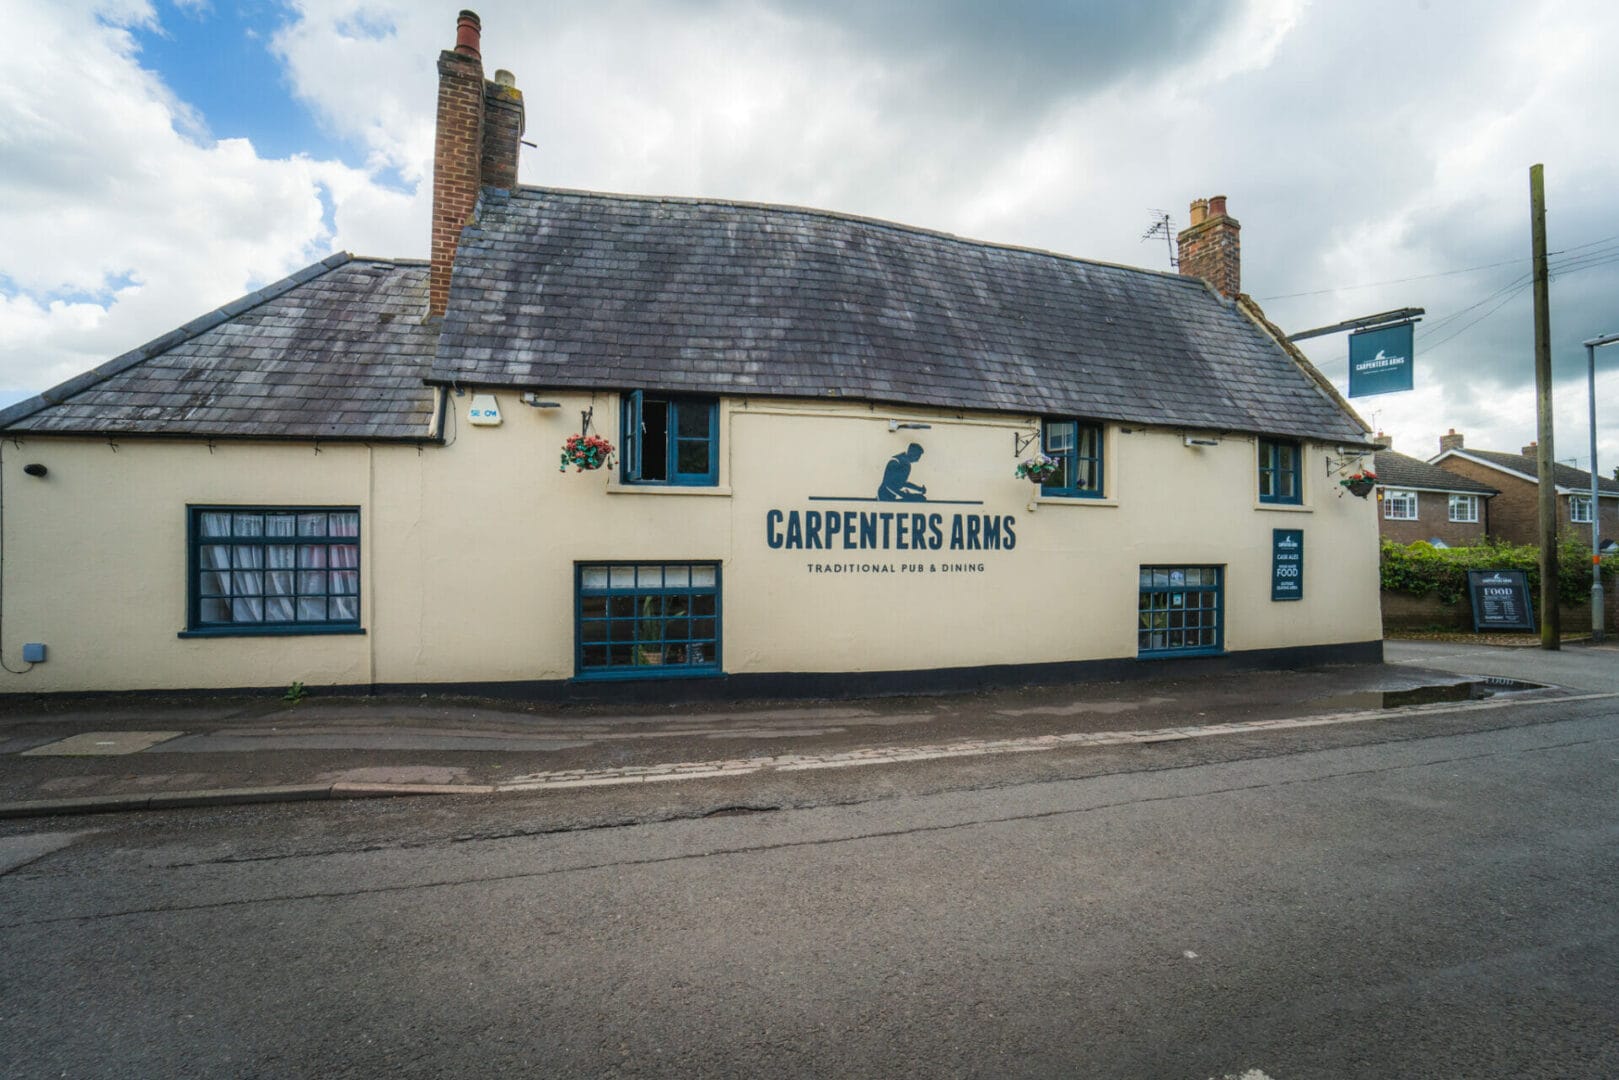 stonegate-Carpenters-Arms-Irchester